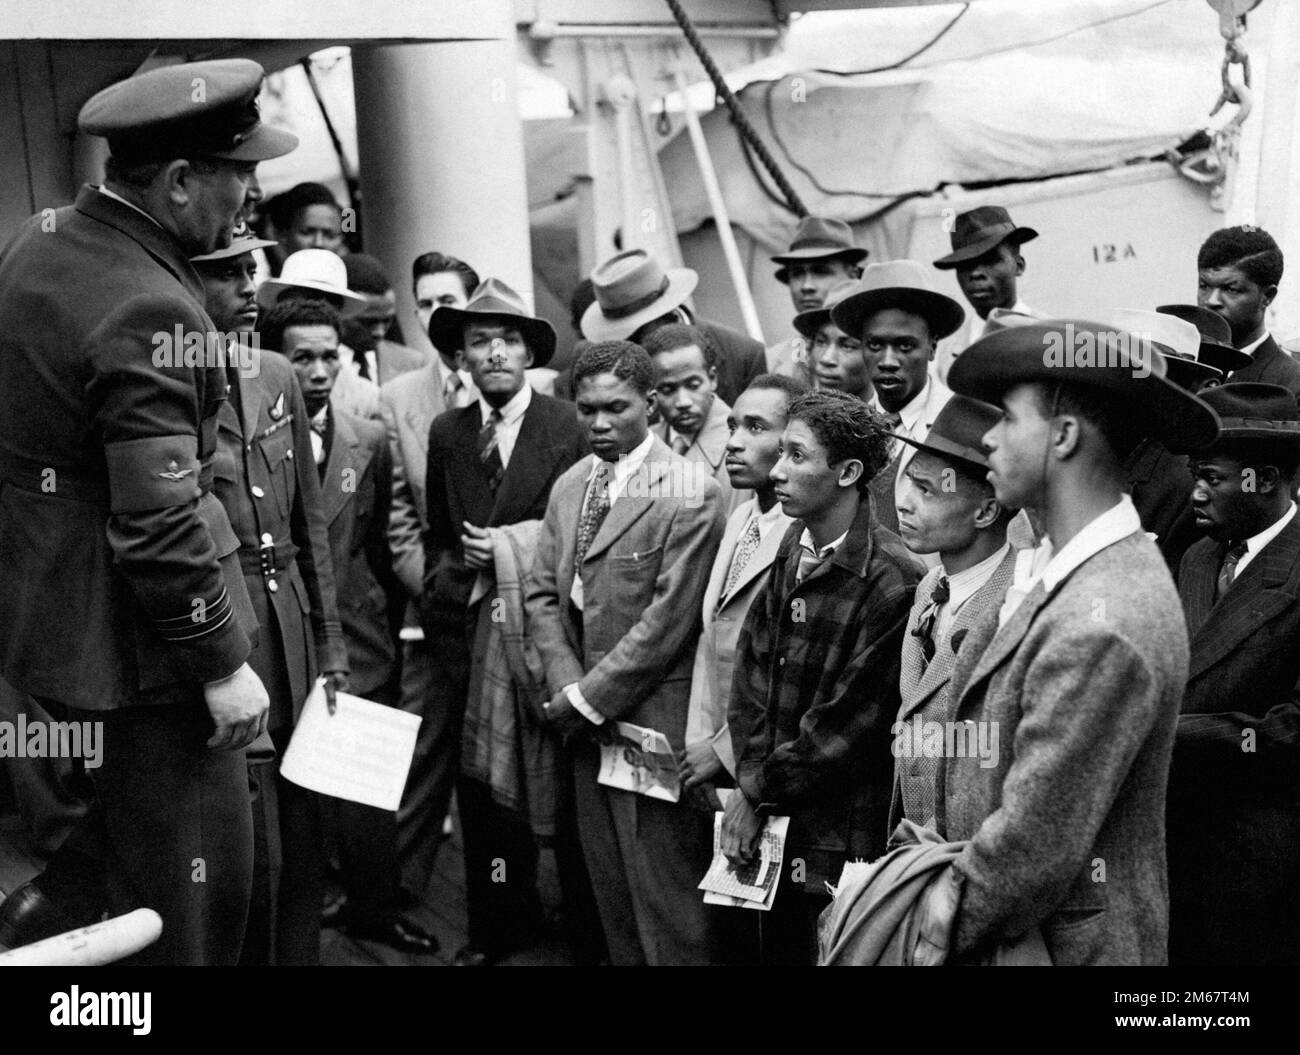 File photo dated 22/06/48 of Jamaican immigrants welcomed by RAF officials from the Colonial Office after the ex-troopship HMT 'Empire Windrush' landed them at Tilbury. The 75th anniversary of the Windrush generation who helped rebuild post-war Britain will be marked later this year as a 'diamond jubilee for modern, diverse Britain', campaigners have said. The Windrush 75 network of national organisations, including British Future charity, which aims to advance racial and cultural harmony in the UK through education, is co-ordinating events to celebrate the historic milestone. Issue date: Tues Stock Photo